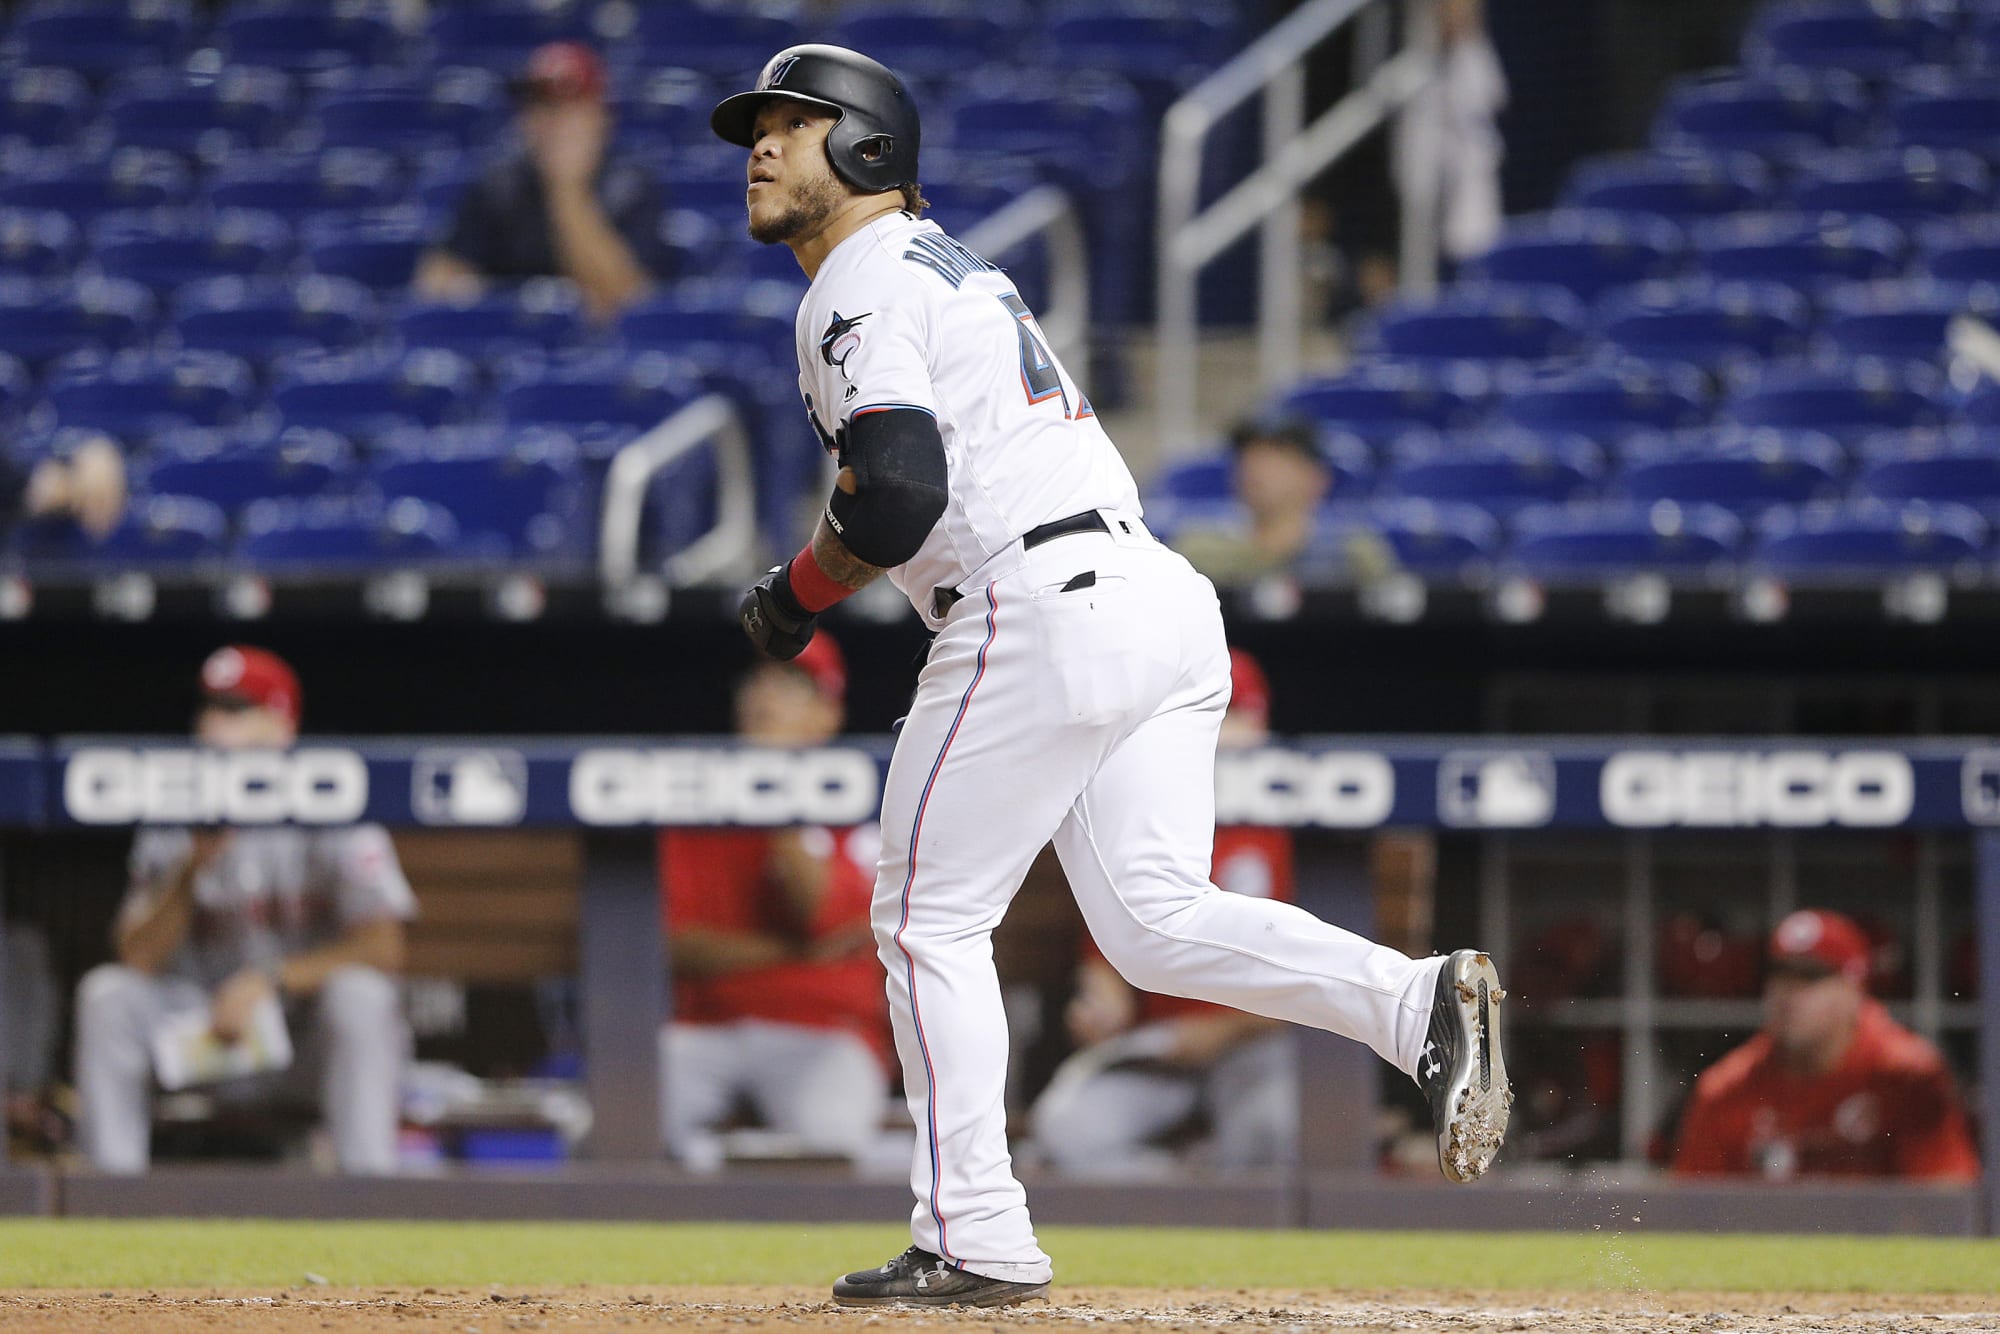 Miami Marlins Make History Against Cincinnati Reds With Four Solo Homers